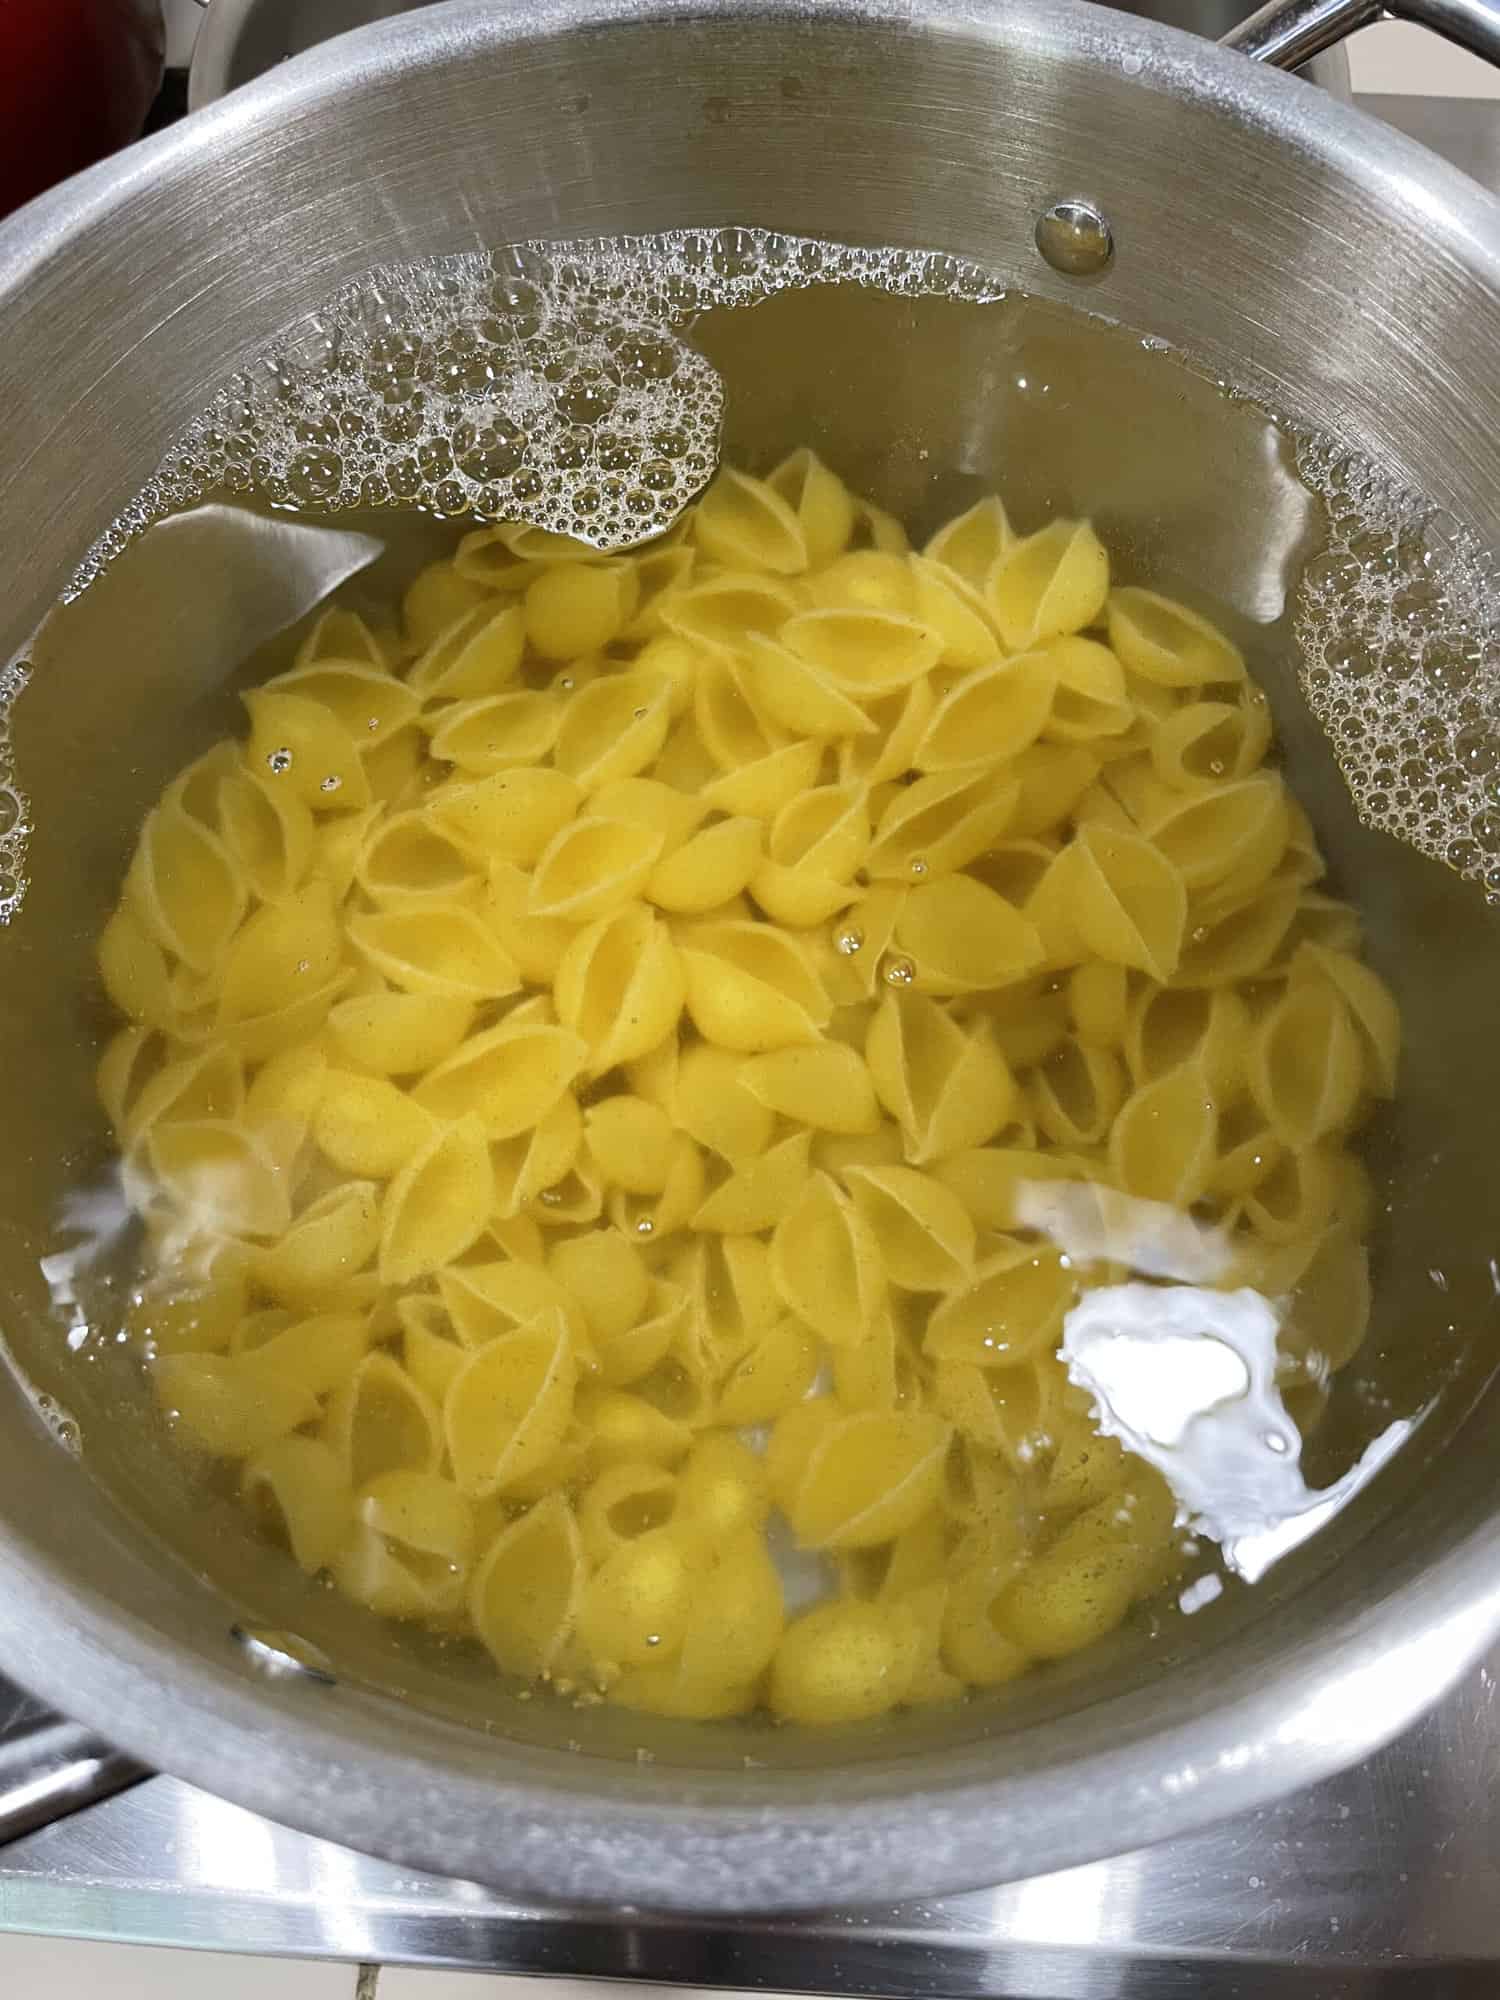 cook the pasta in salted water